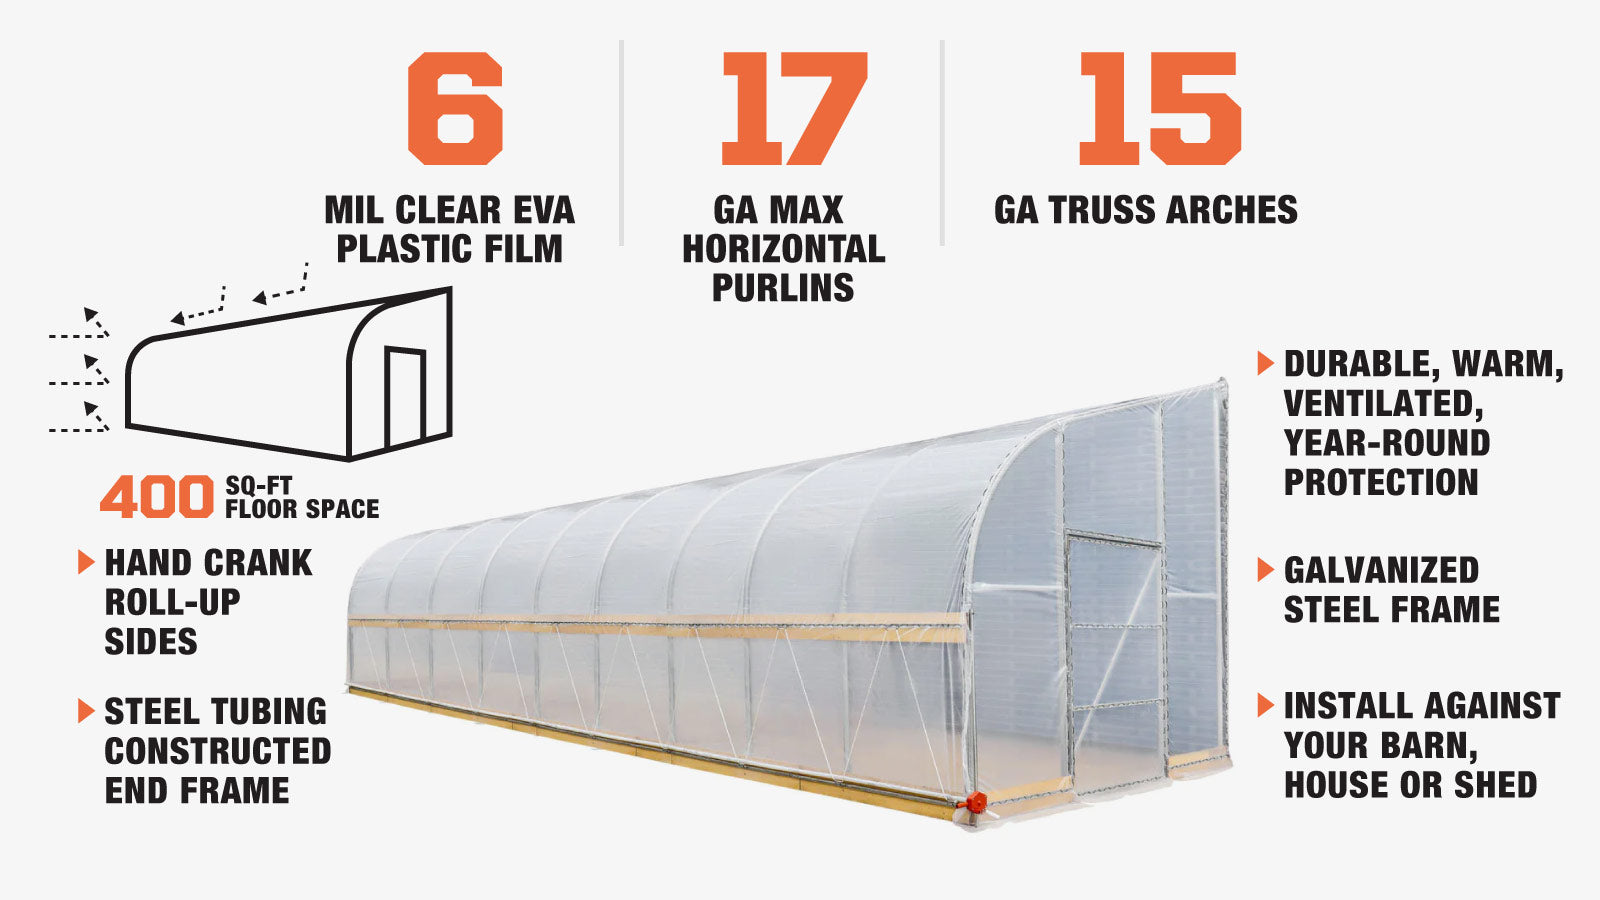 TMG Industrial 10’ x 40’ Lean-To Greenhouse Grow Tent w/6 Mil Clear EVA Plastic Film, Cold Frame, Hand Crank Roll-Up Side, 6-½’ Sidewall, TMG-GHL1040-description-image